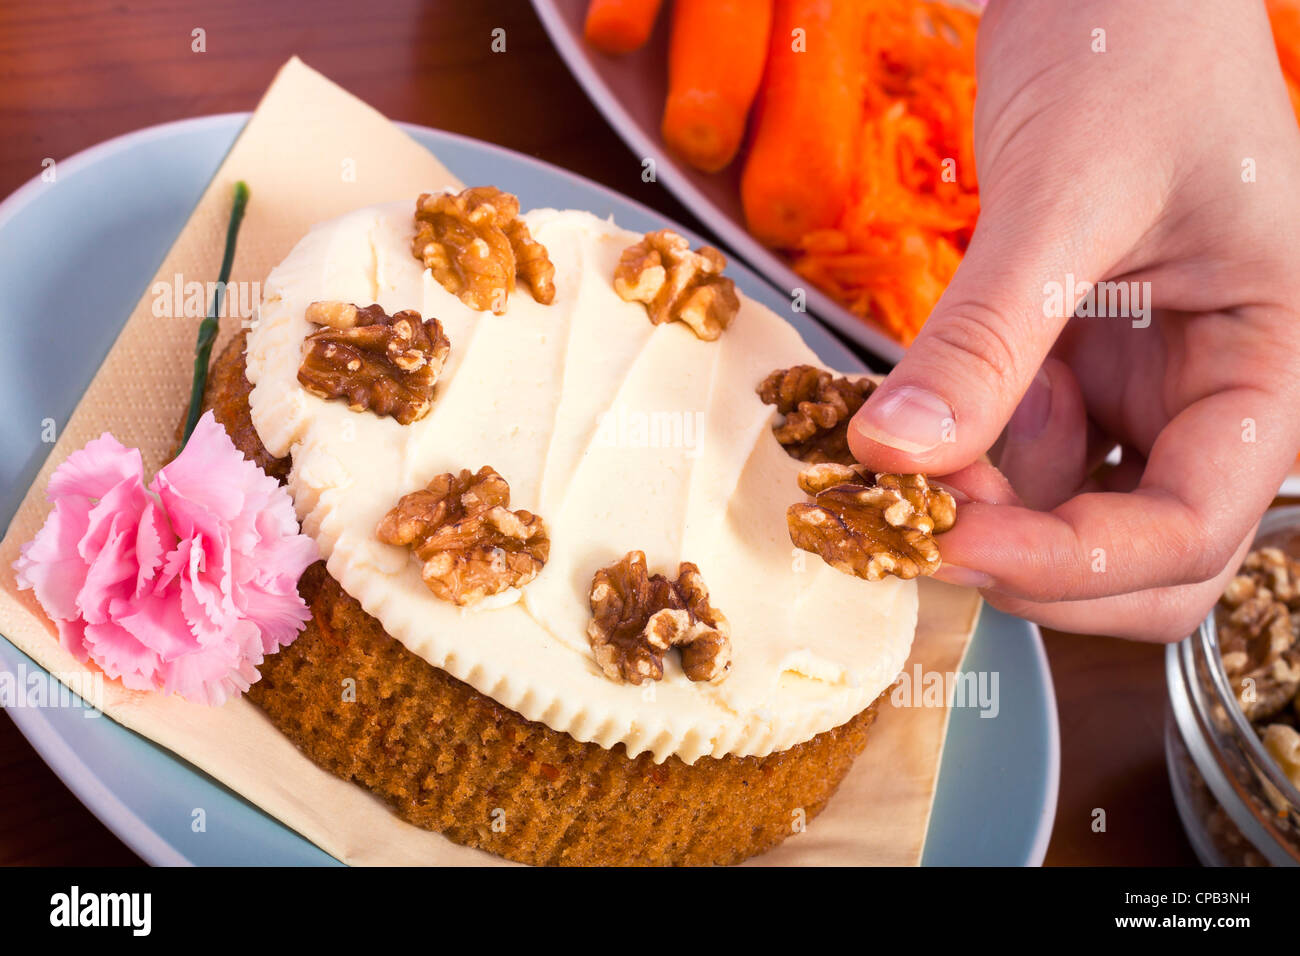 Close up of decorating carrot cake with walnuts. Stock Photo